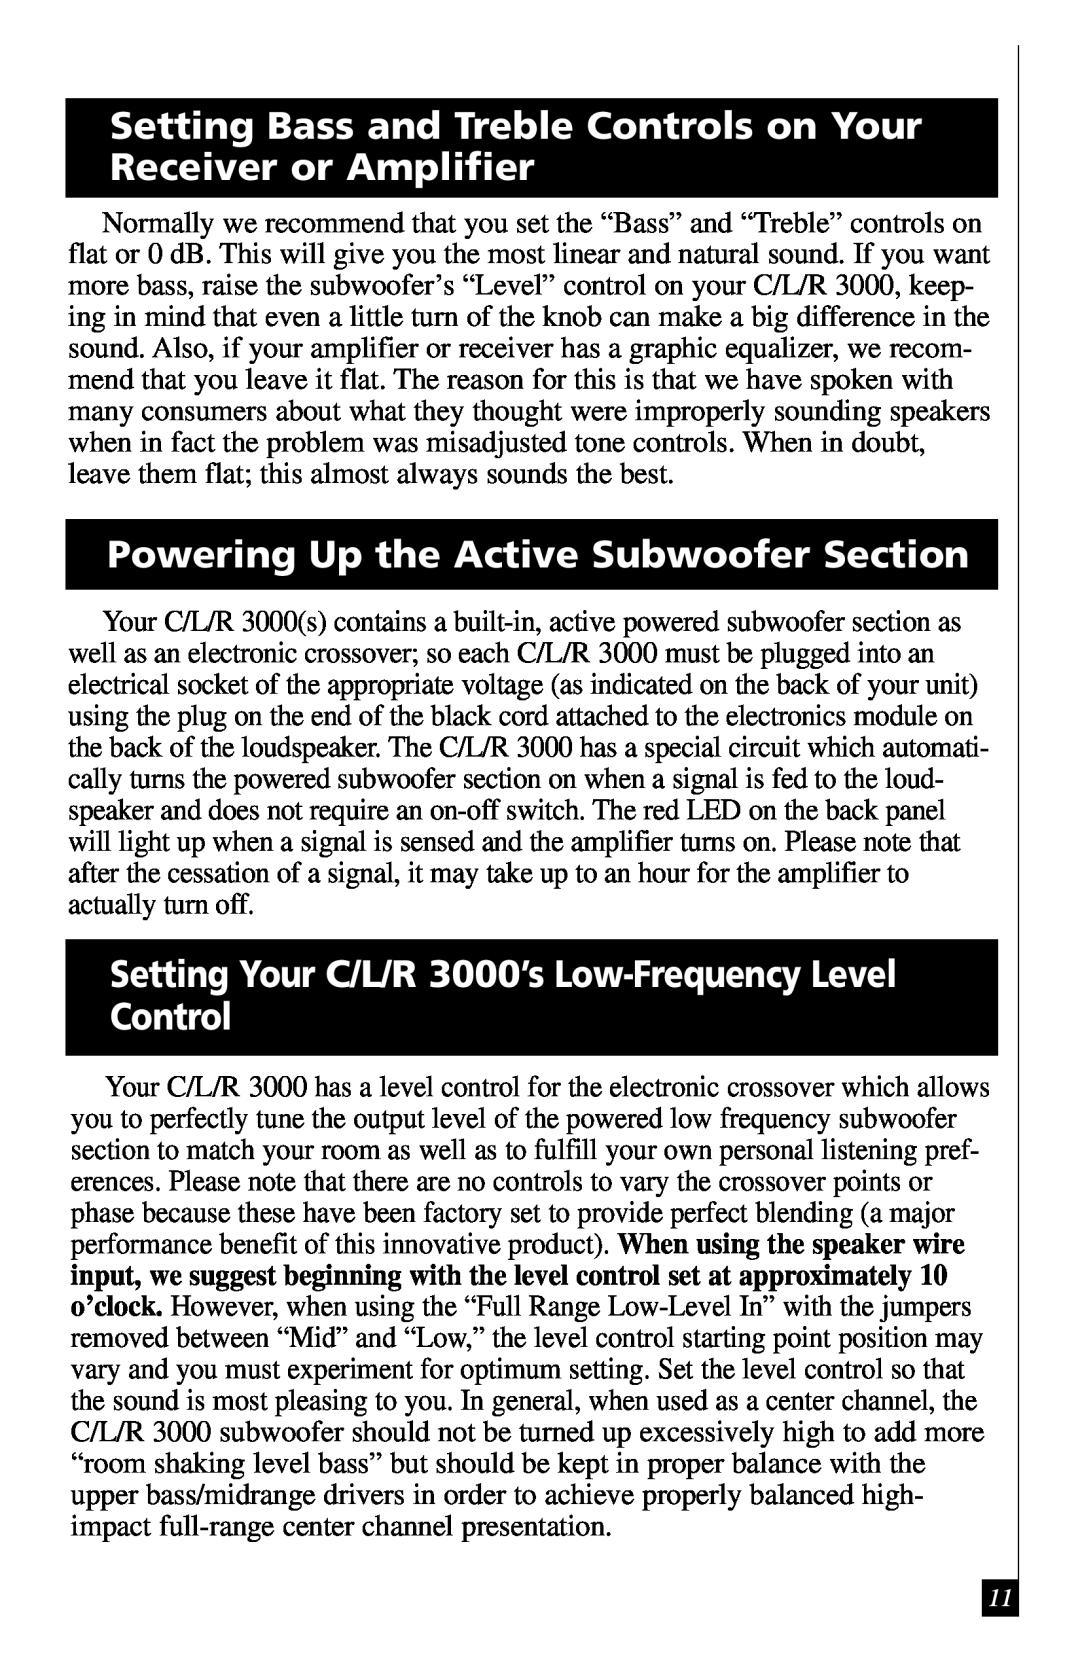 Definitive Technology 3000 owner manual Powering Up the Active Subwoofer Section 